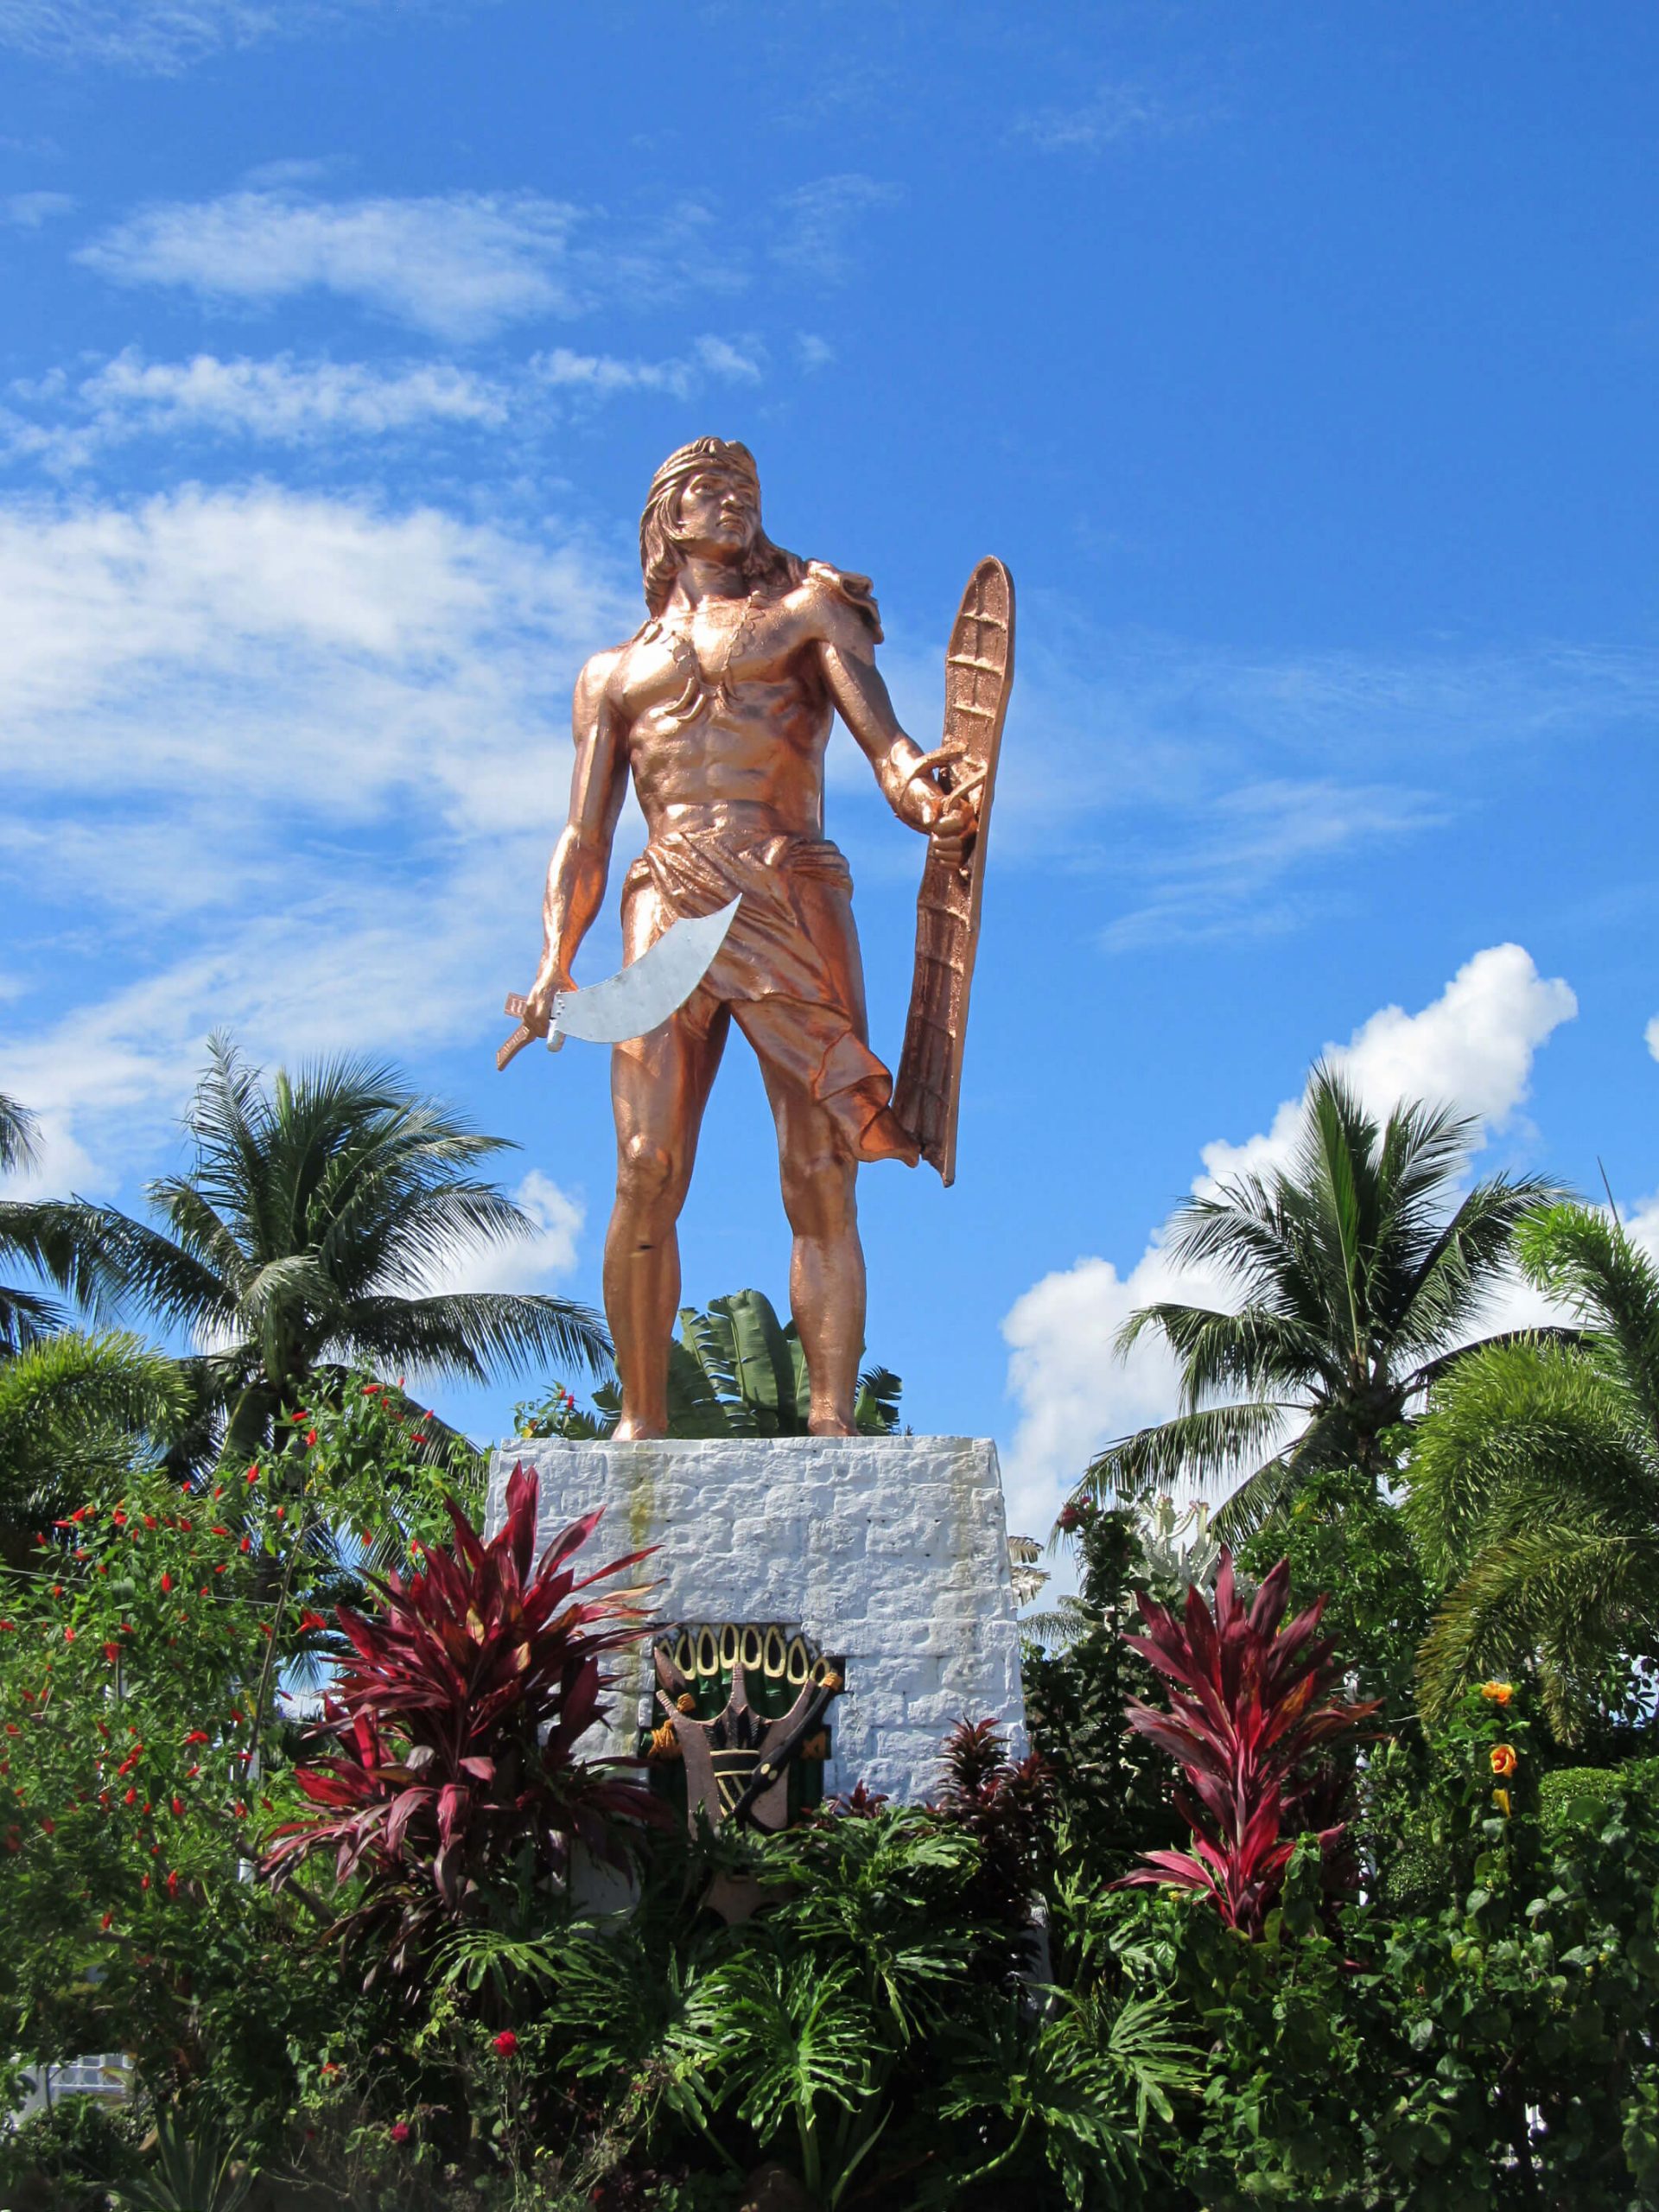 LIBERTY SHRINE. The statue of chieftain Lapulapu at the Liberty Shrine. Dr. Resil Mojares said research indicates that during the Battle of Mactan, Lapulapu was “quite old” and may have coordinated the battle but not actually fought in it.